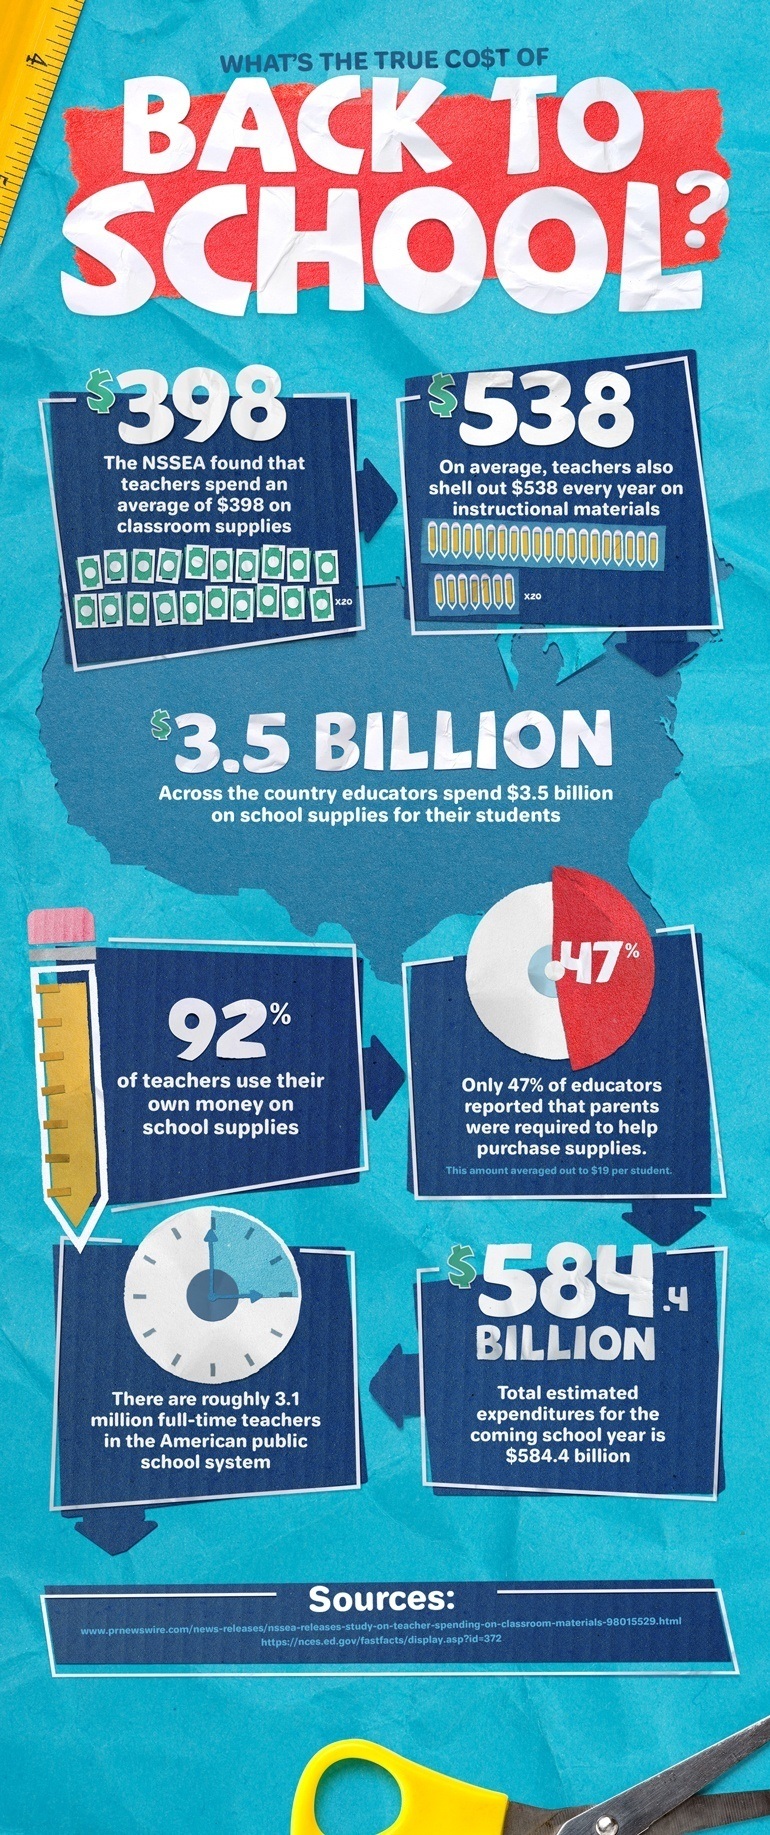 What's the True Cost of Going Back to School Infographic eLearning